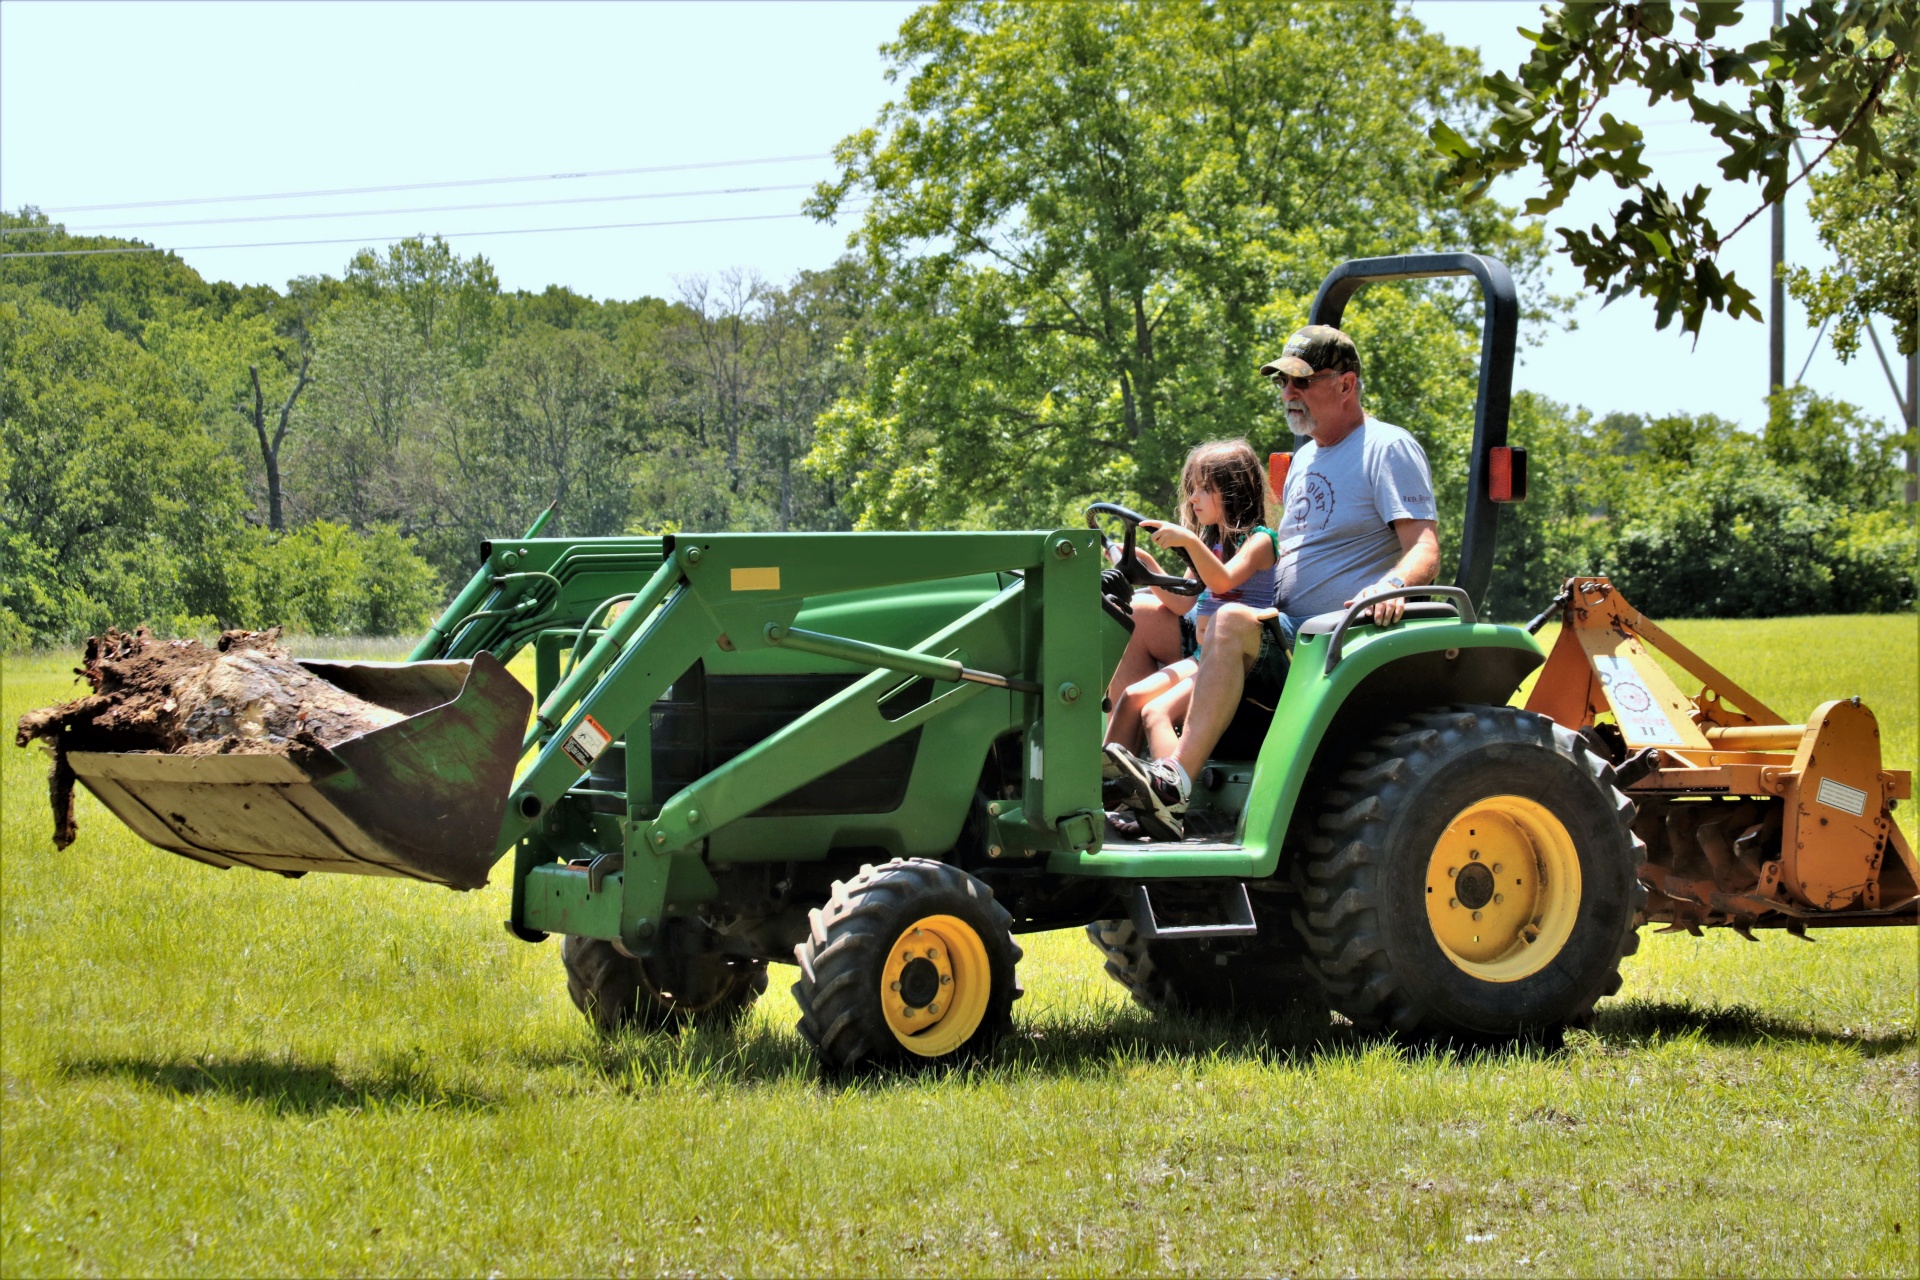 A cute little girl, sitting in her grandfather's lap, driving a farm tractor in a green country field.